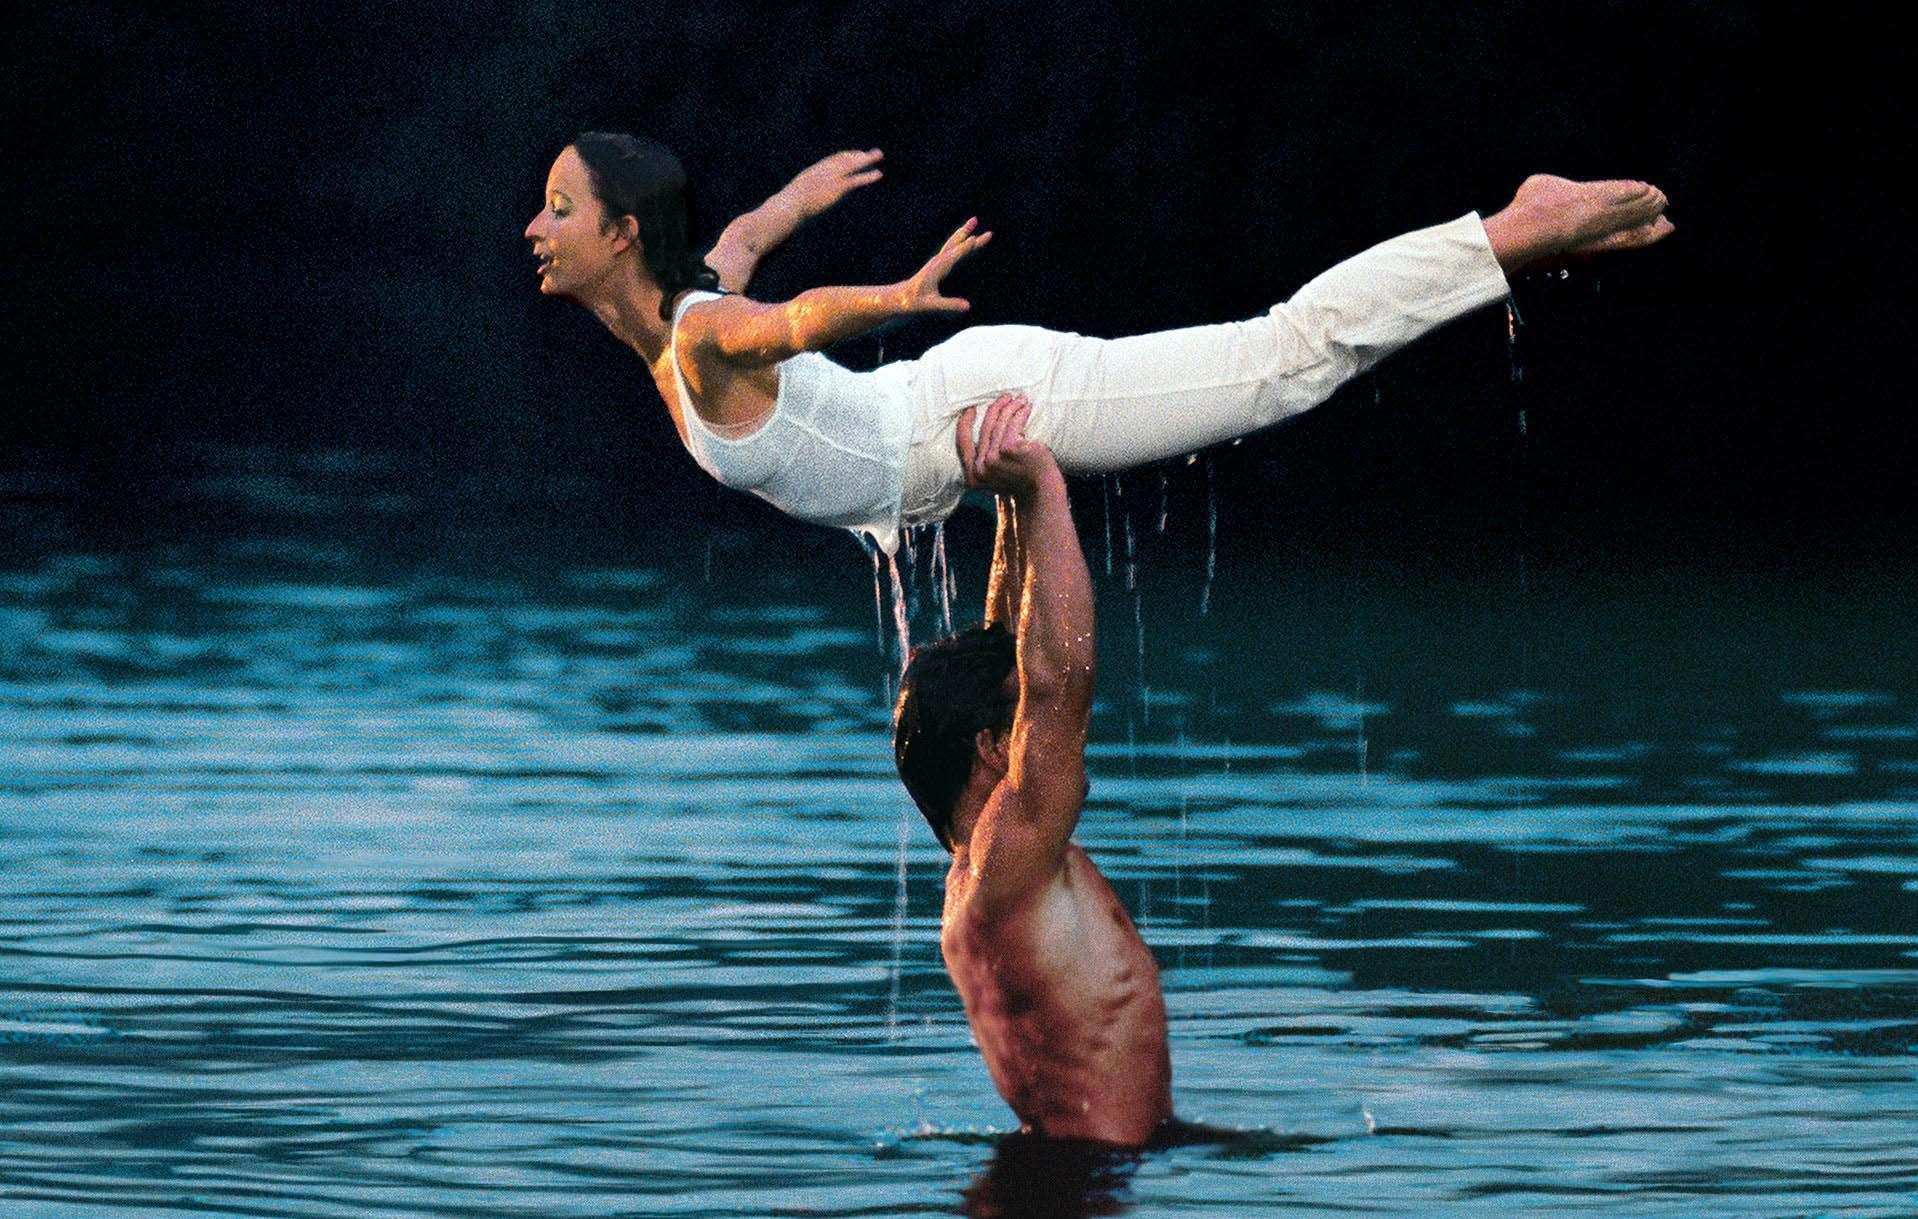 Dirty Dancing will be screened at the King's Hall